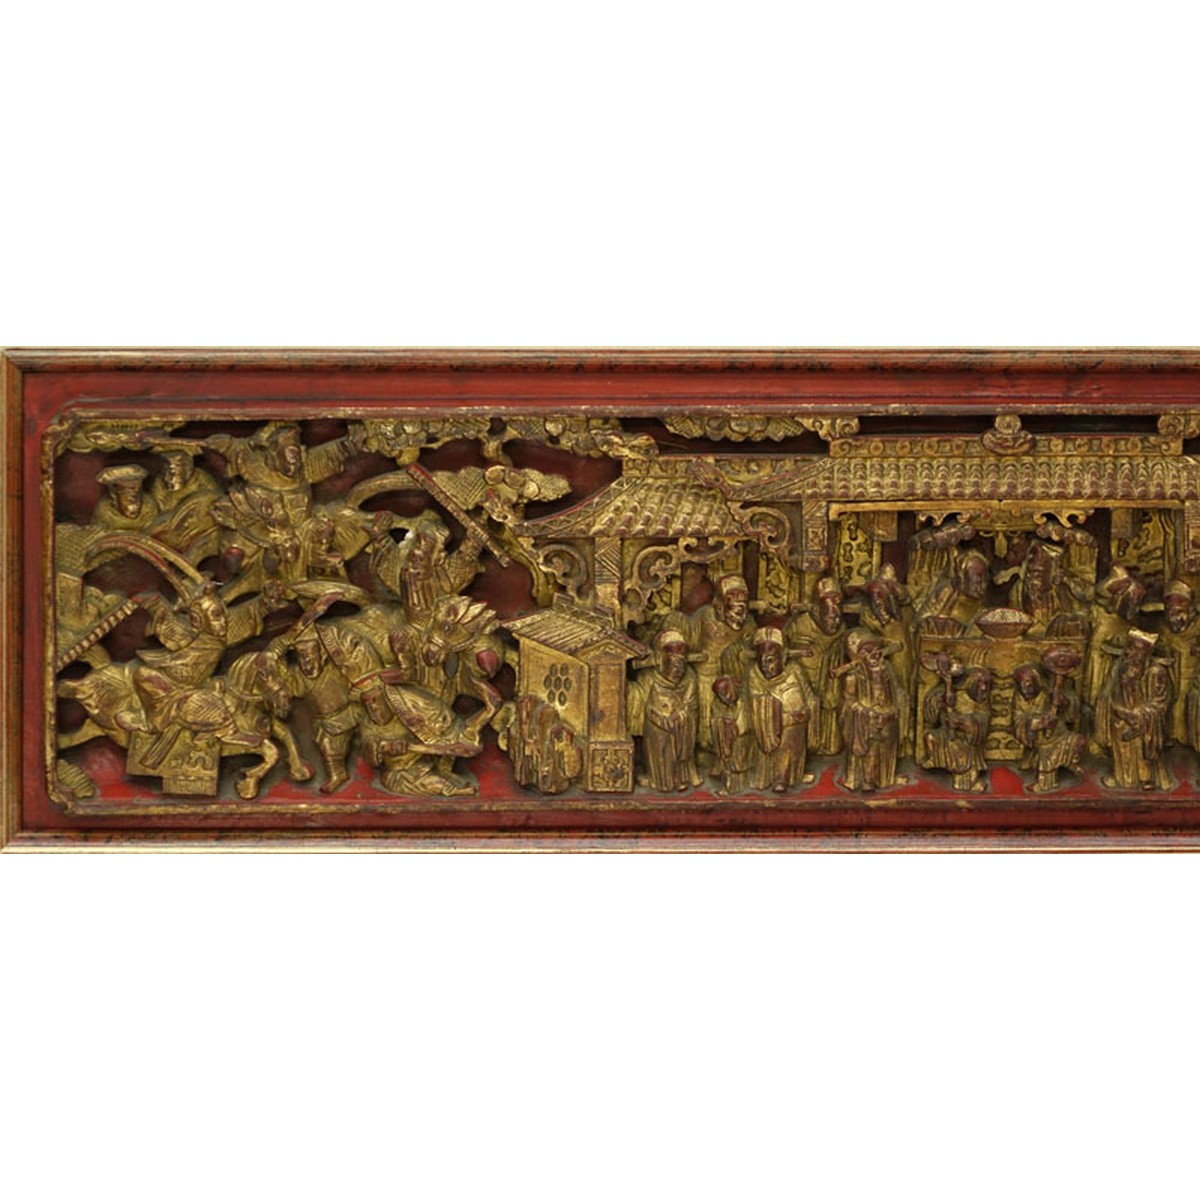 Chinese Gilt Painted and  Deep Relief Carved Wood Scenic Panel. Rubbing to gilt.